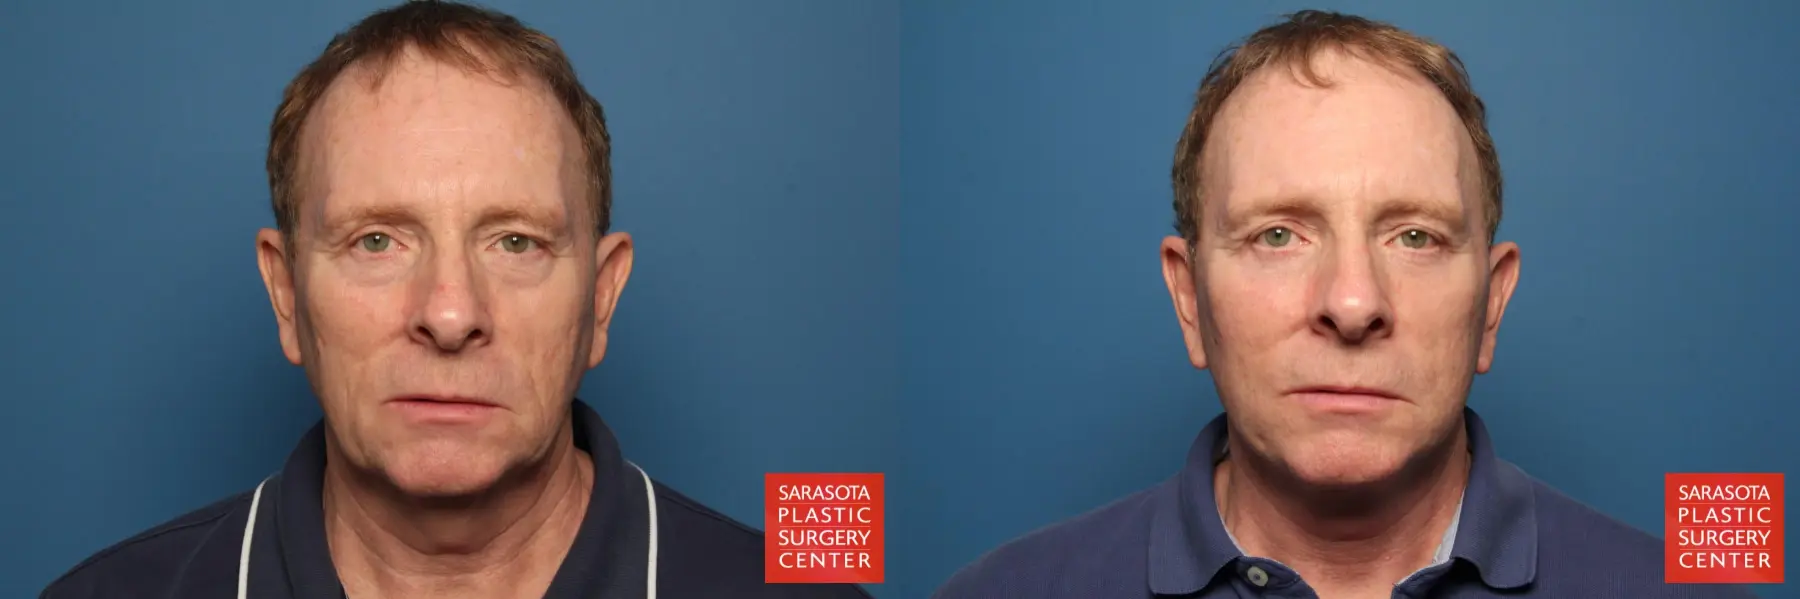 Facelift - Male: Patient 3 - Before and After  